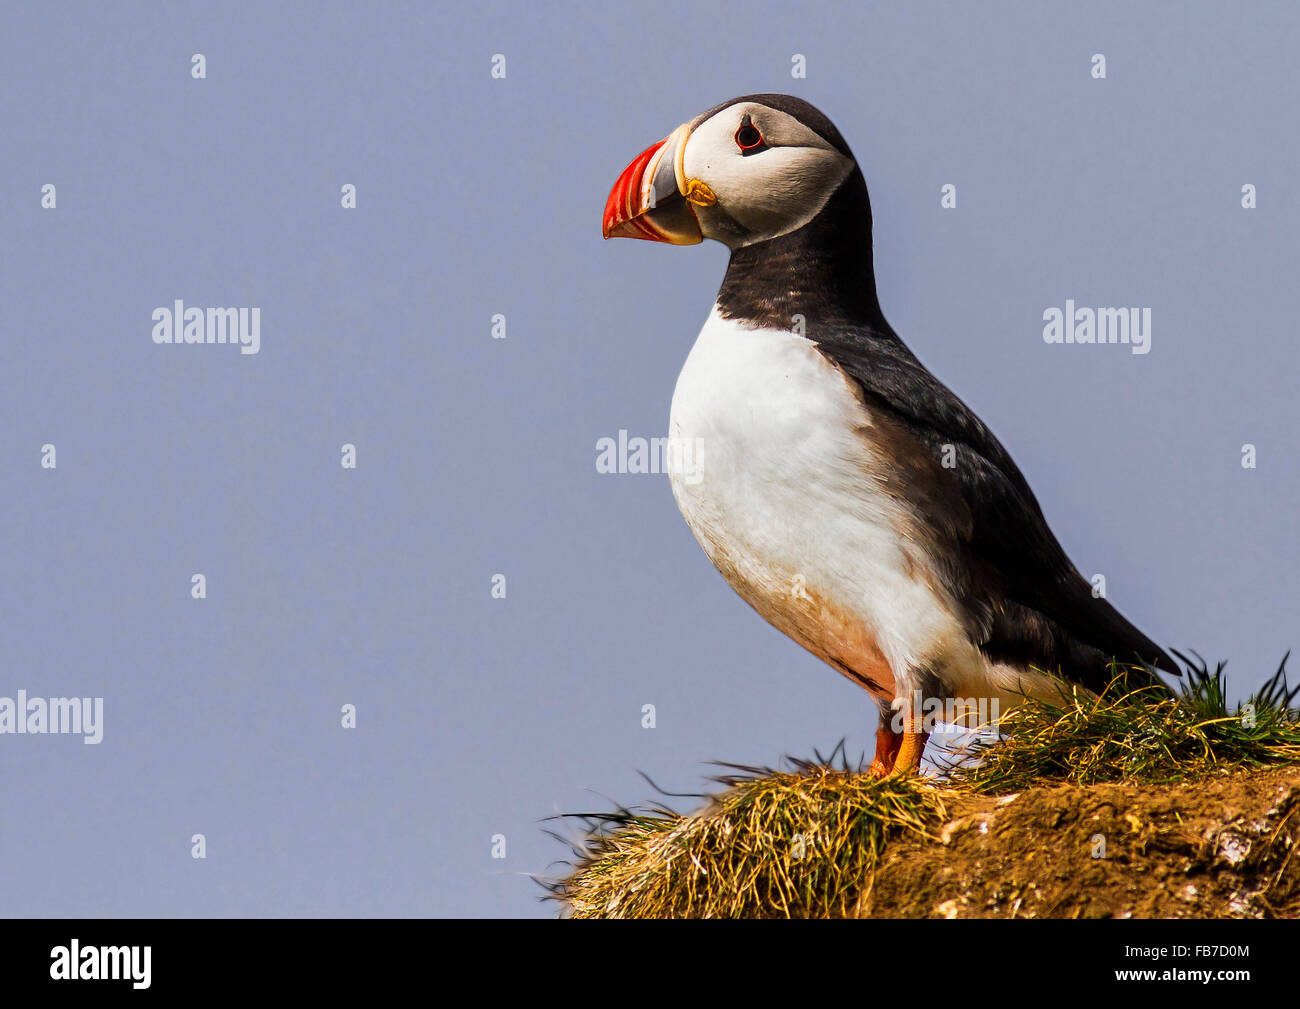 Puffin on Cliff Stock Photo